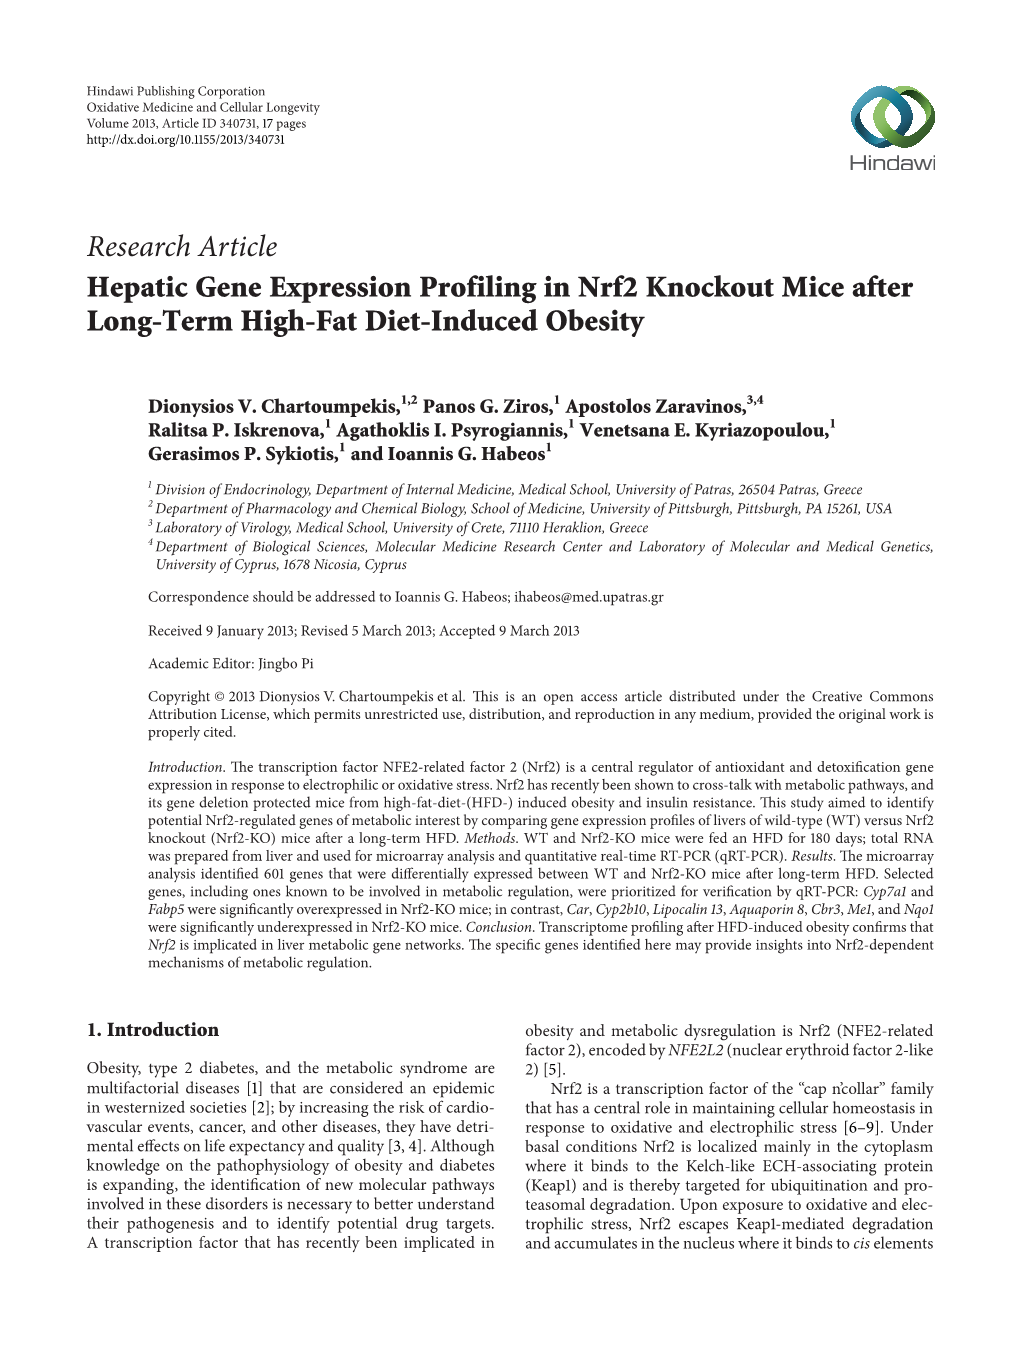 Hepatic Gene Expression Profiling in Nrf2 Knockout Mice After Long-Term High-Fat Diet-Induced Obesity